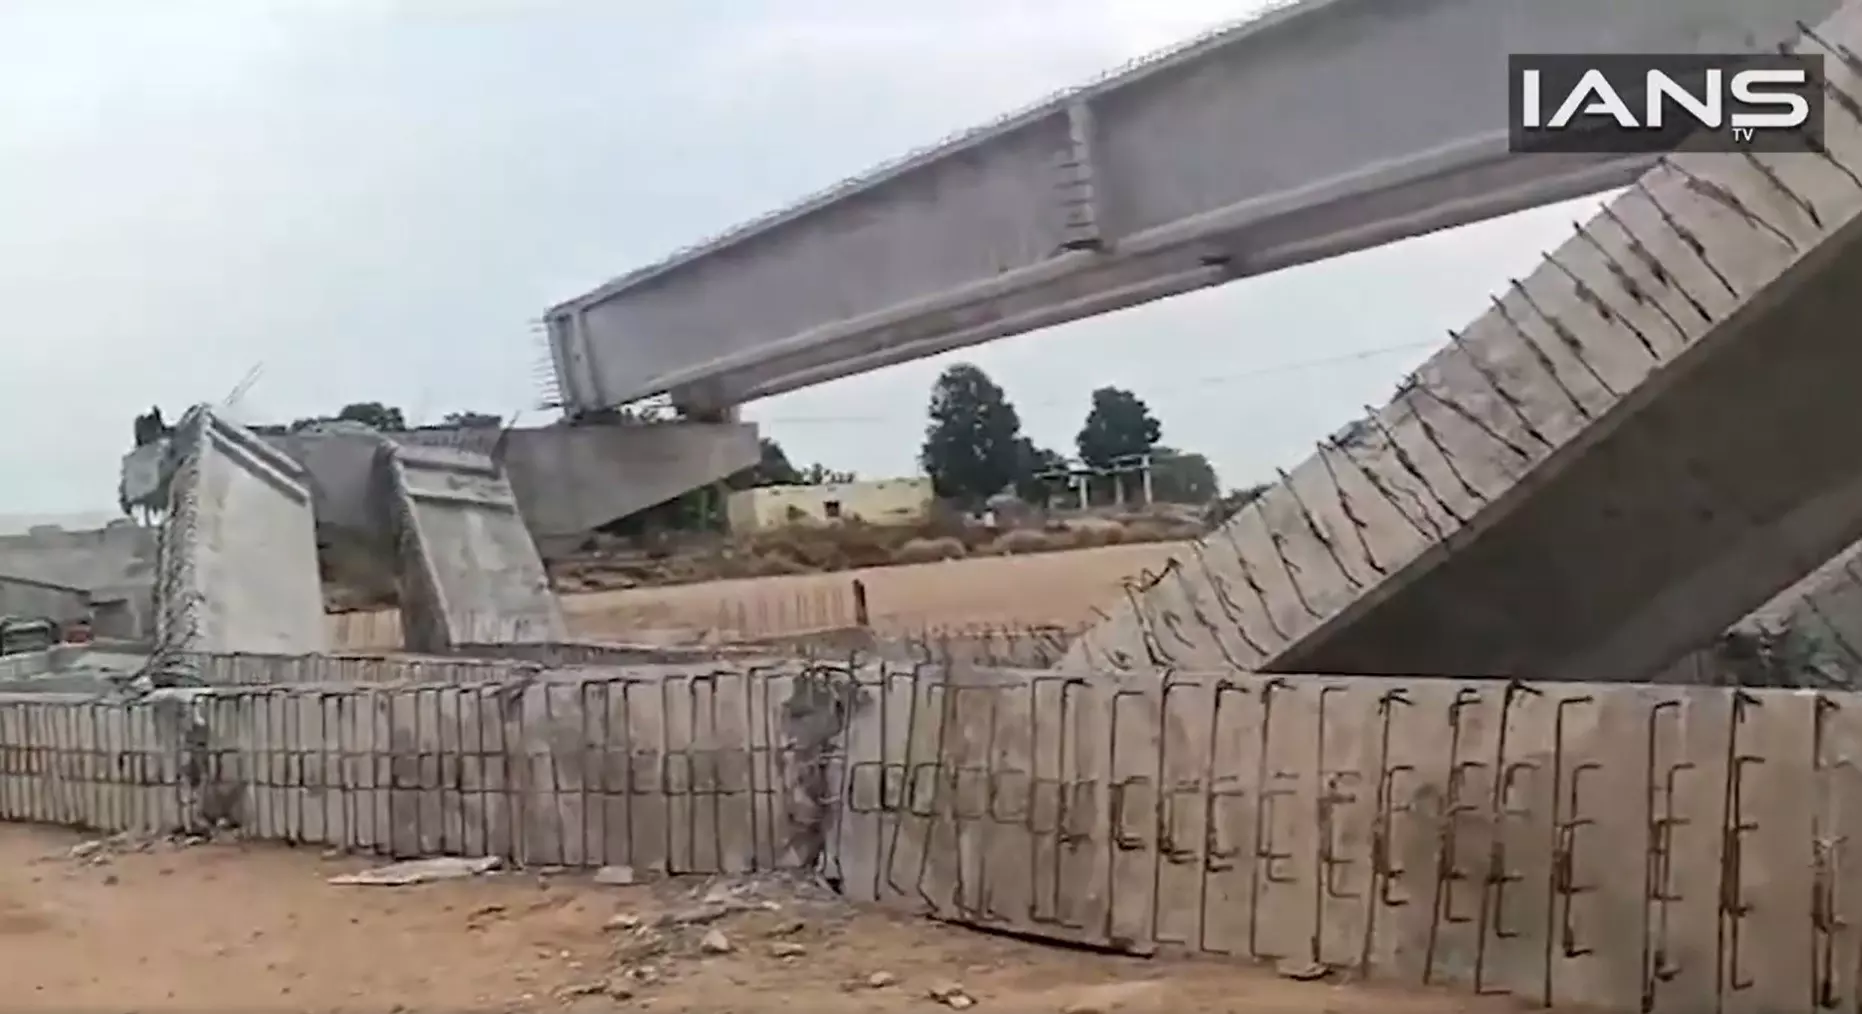 1-km Telangana bridge, under construction for 8 years, toppled by wind